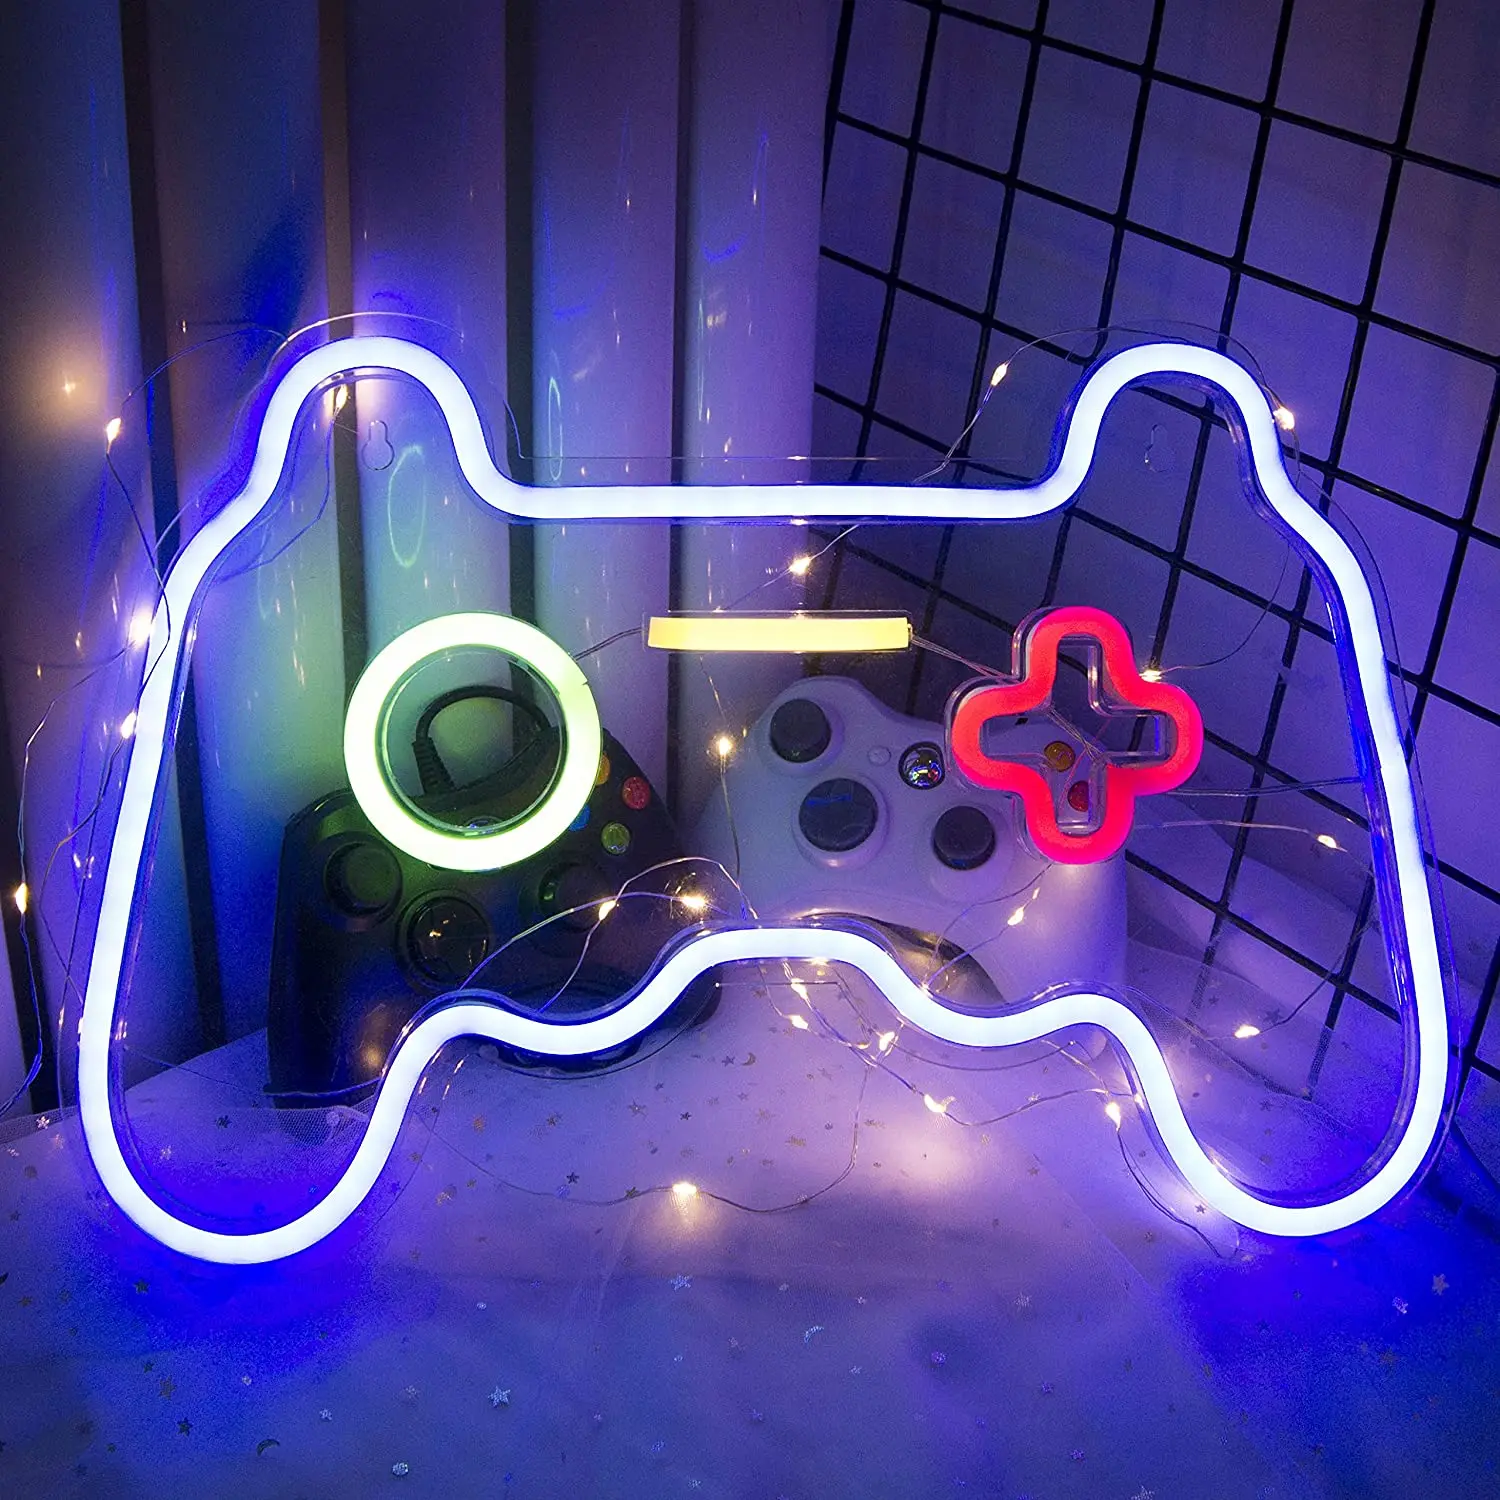 For Playstation Gamepad Shaped Neon Signs Lights Game Controller Led Neon Sign Light Up Gaming Room Bedroom Decor - Night Lights AliExpress